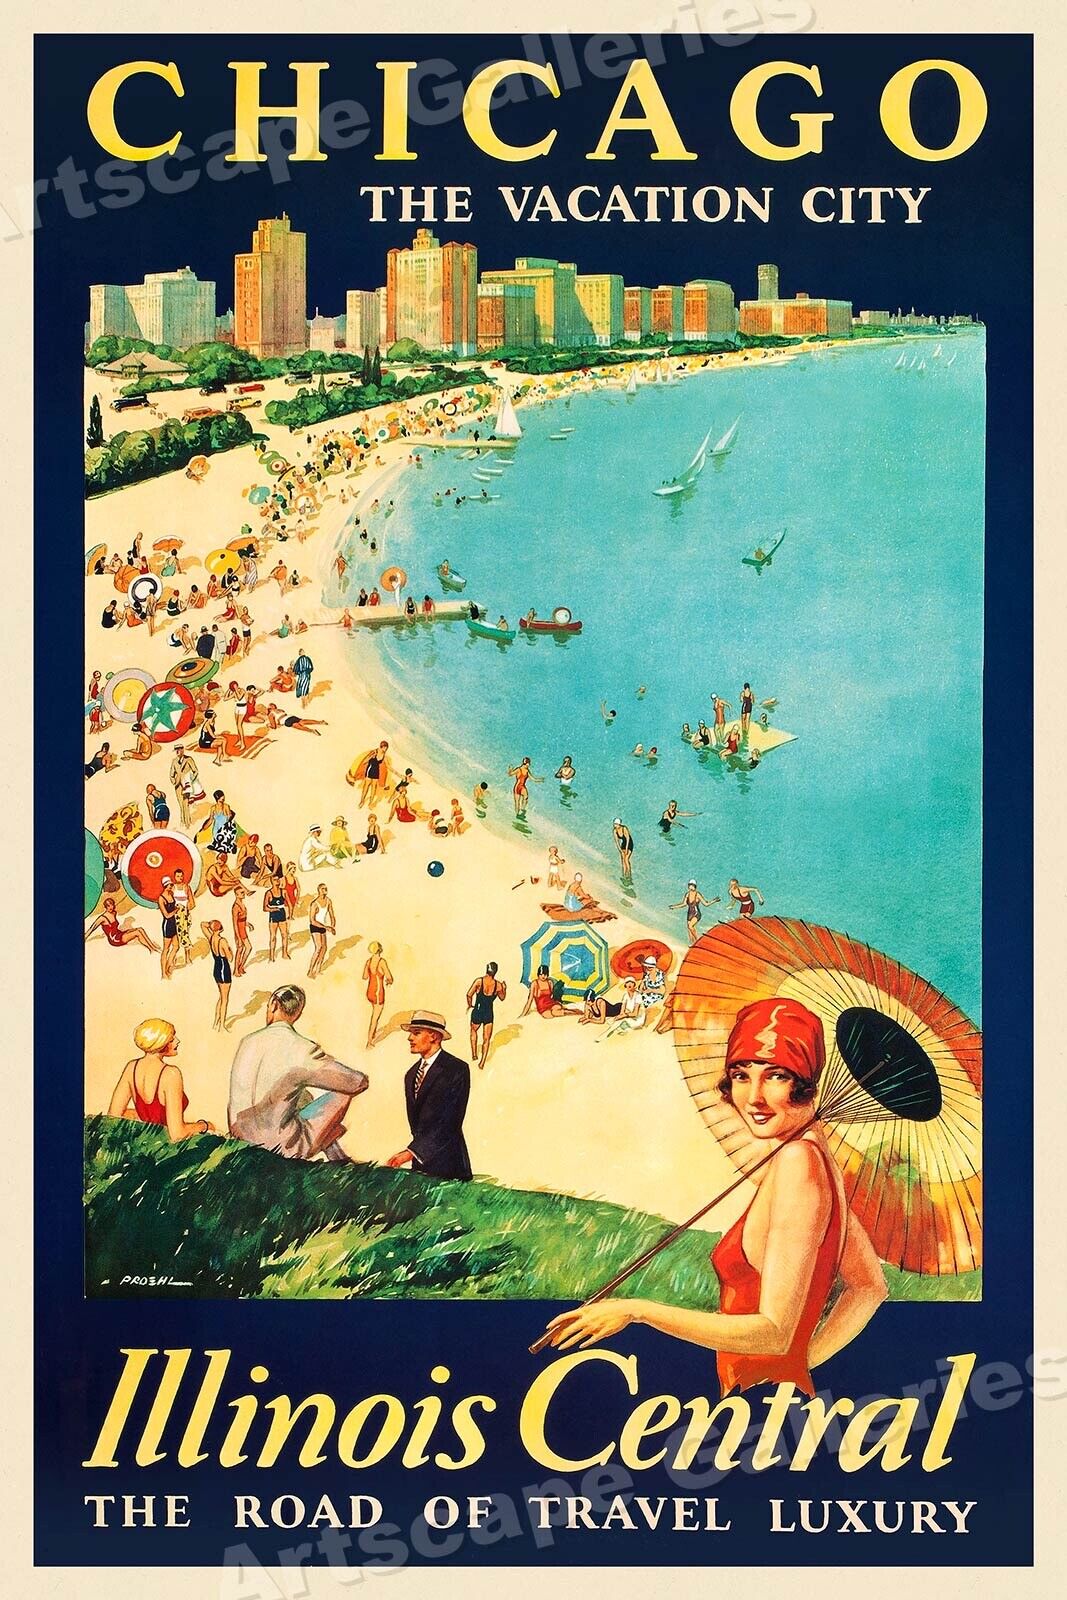 1929 Chicago the Vacation City Vintage Style Travel Poster - 24x36